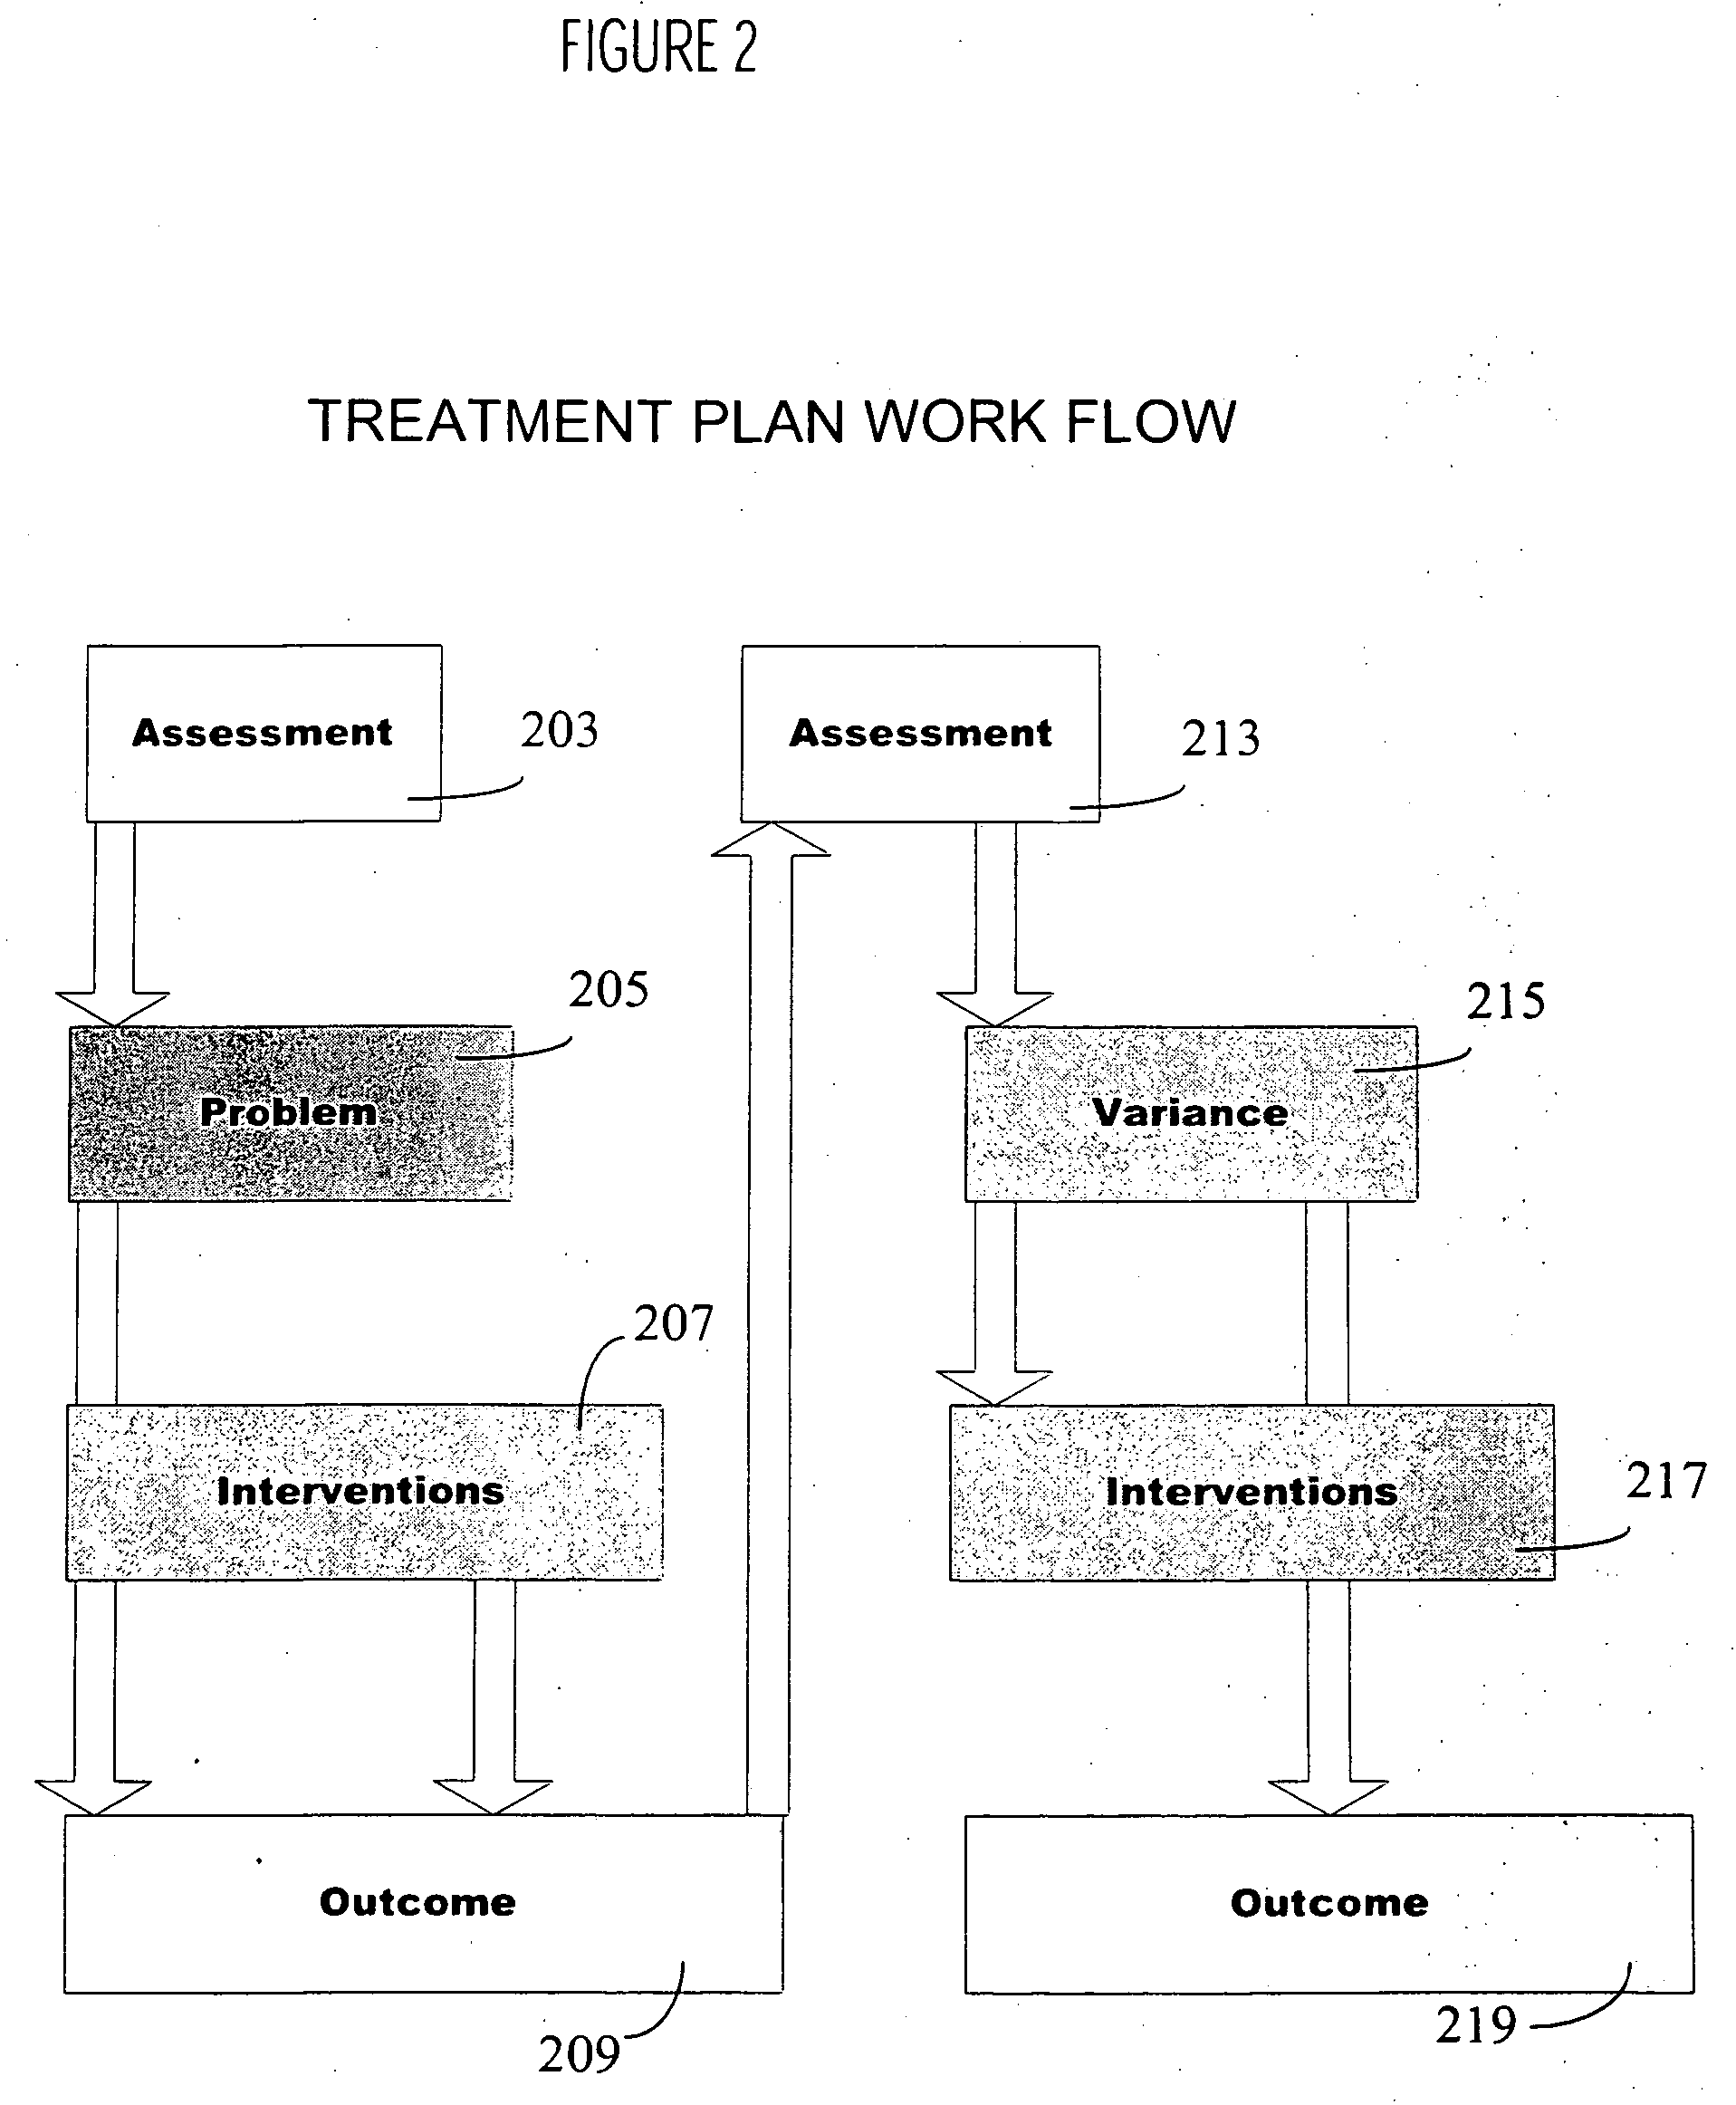 Treatment data processing and planning system